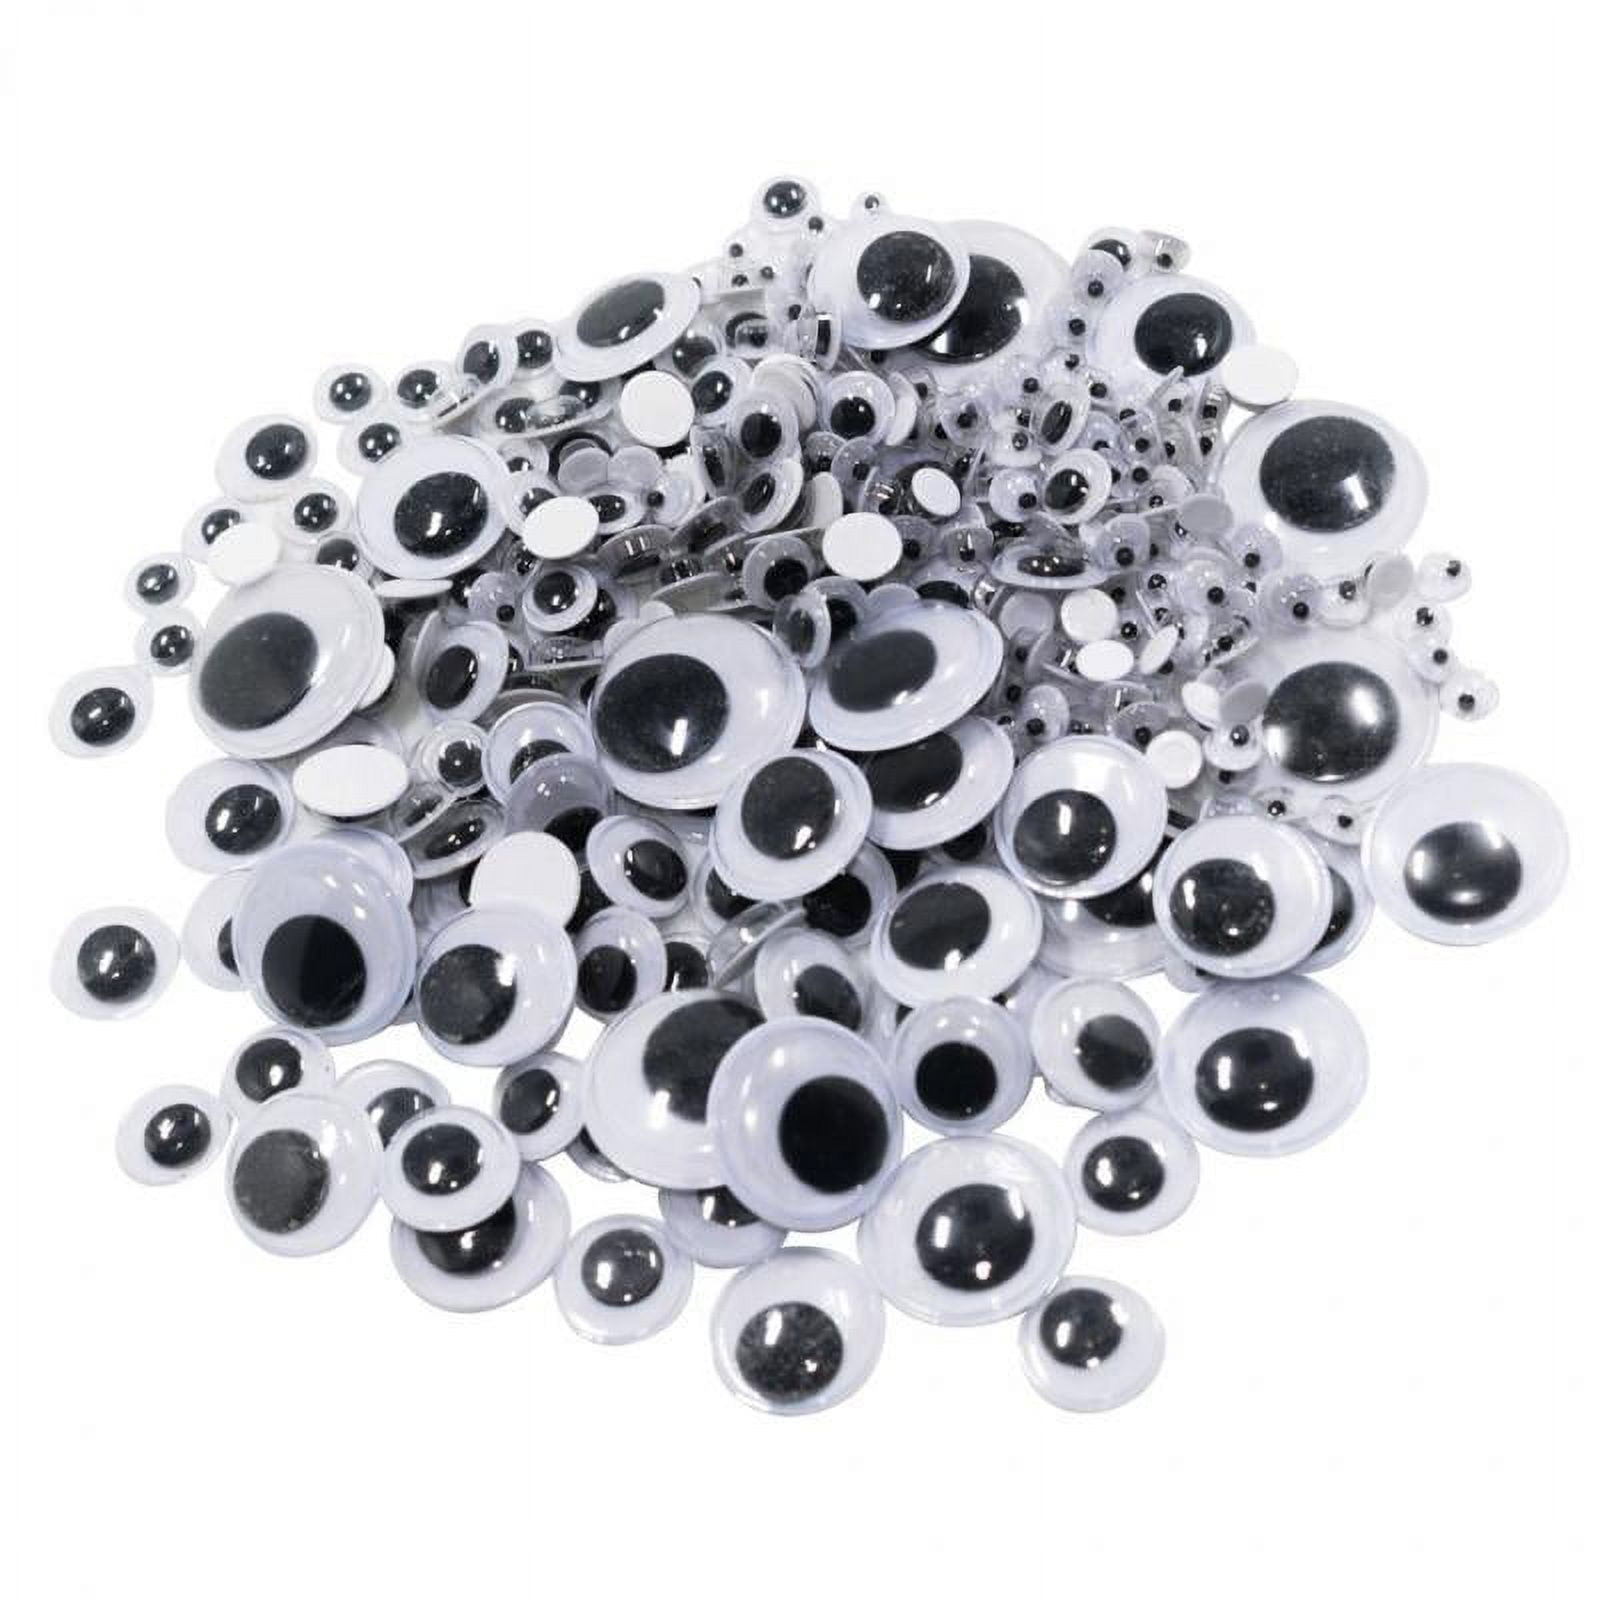 BEADNOVA Black Wiggle Googly Eyes Wobbly Eyes with Self Adhesive Sticker  for DIY Craft Scrapbooking (50mm